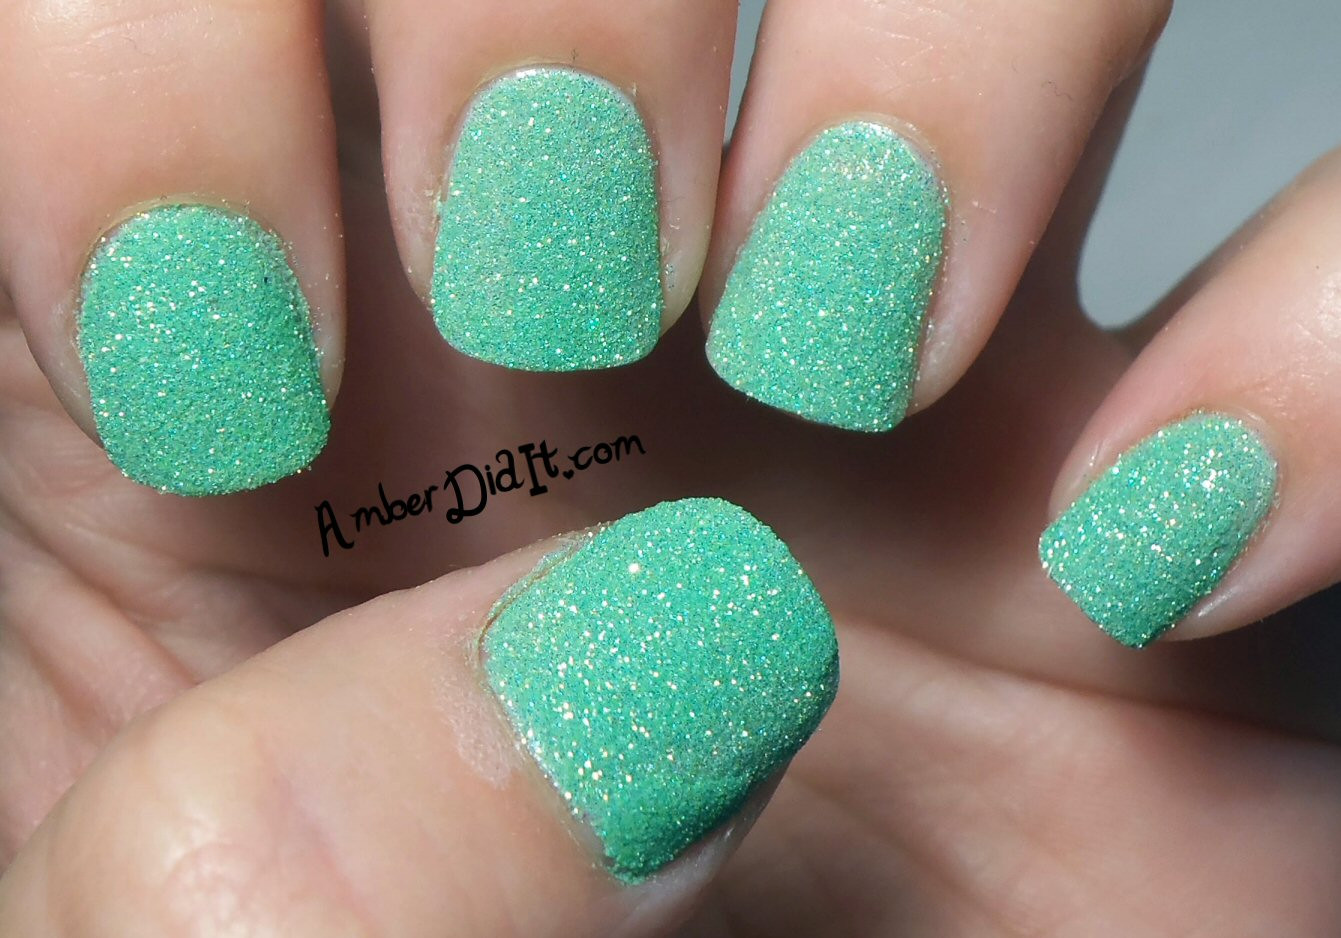 7. Glitter Nail Designs for Teens - wide 6